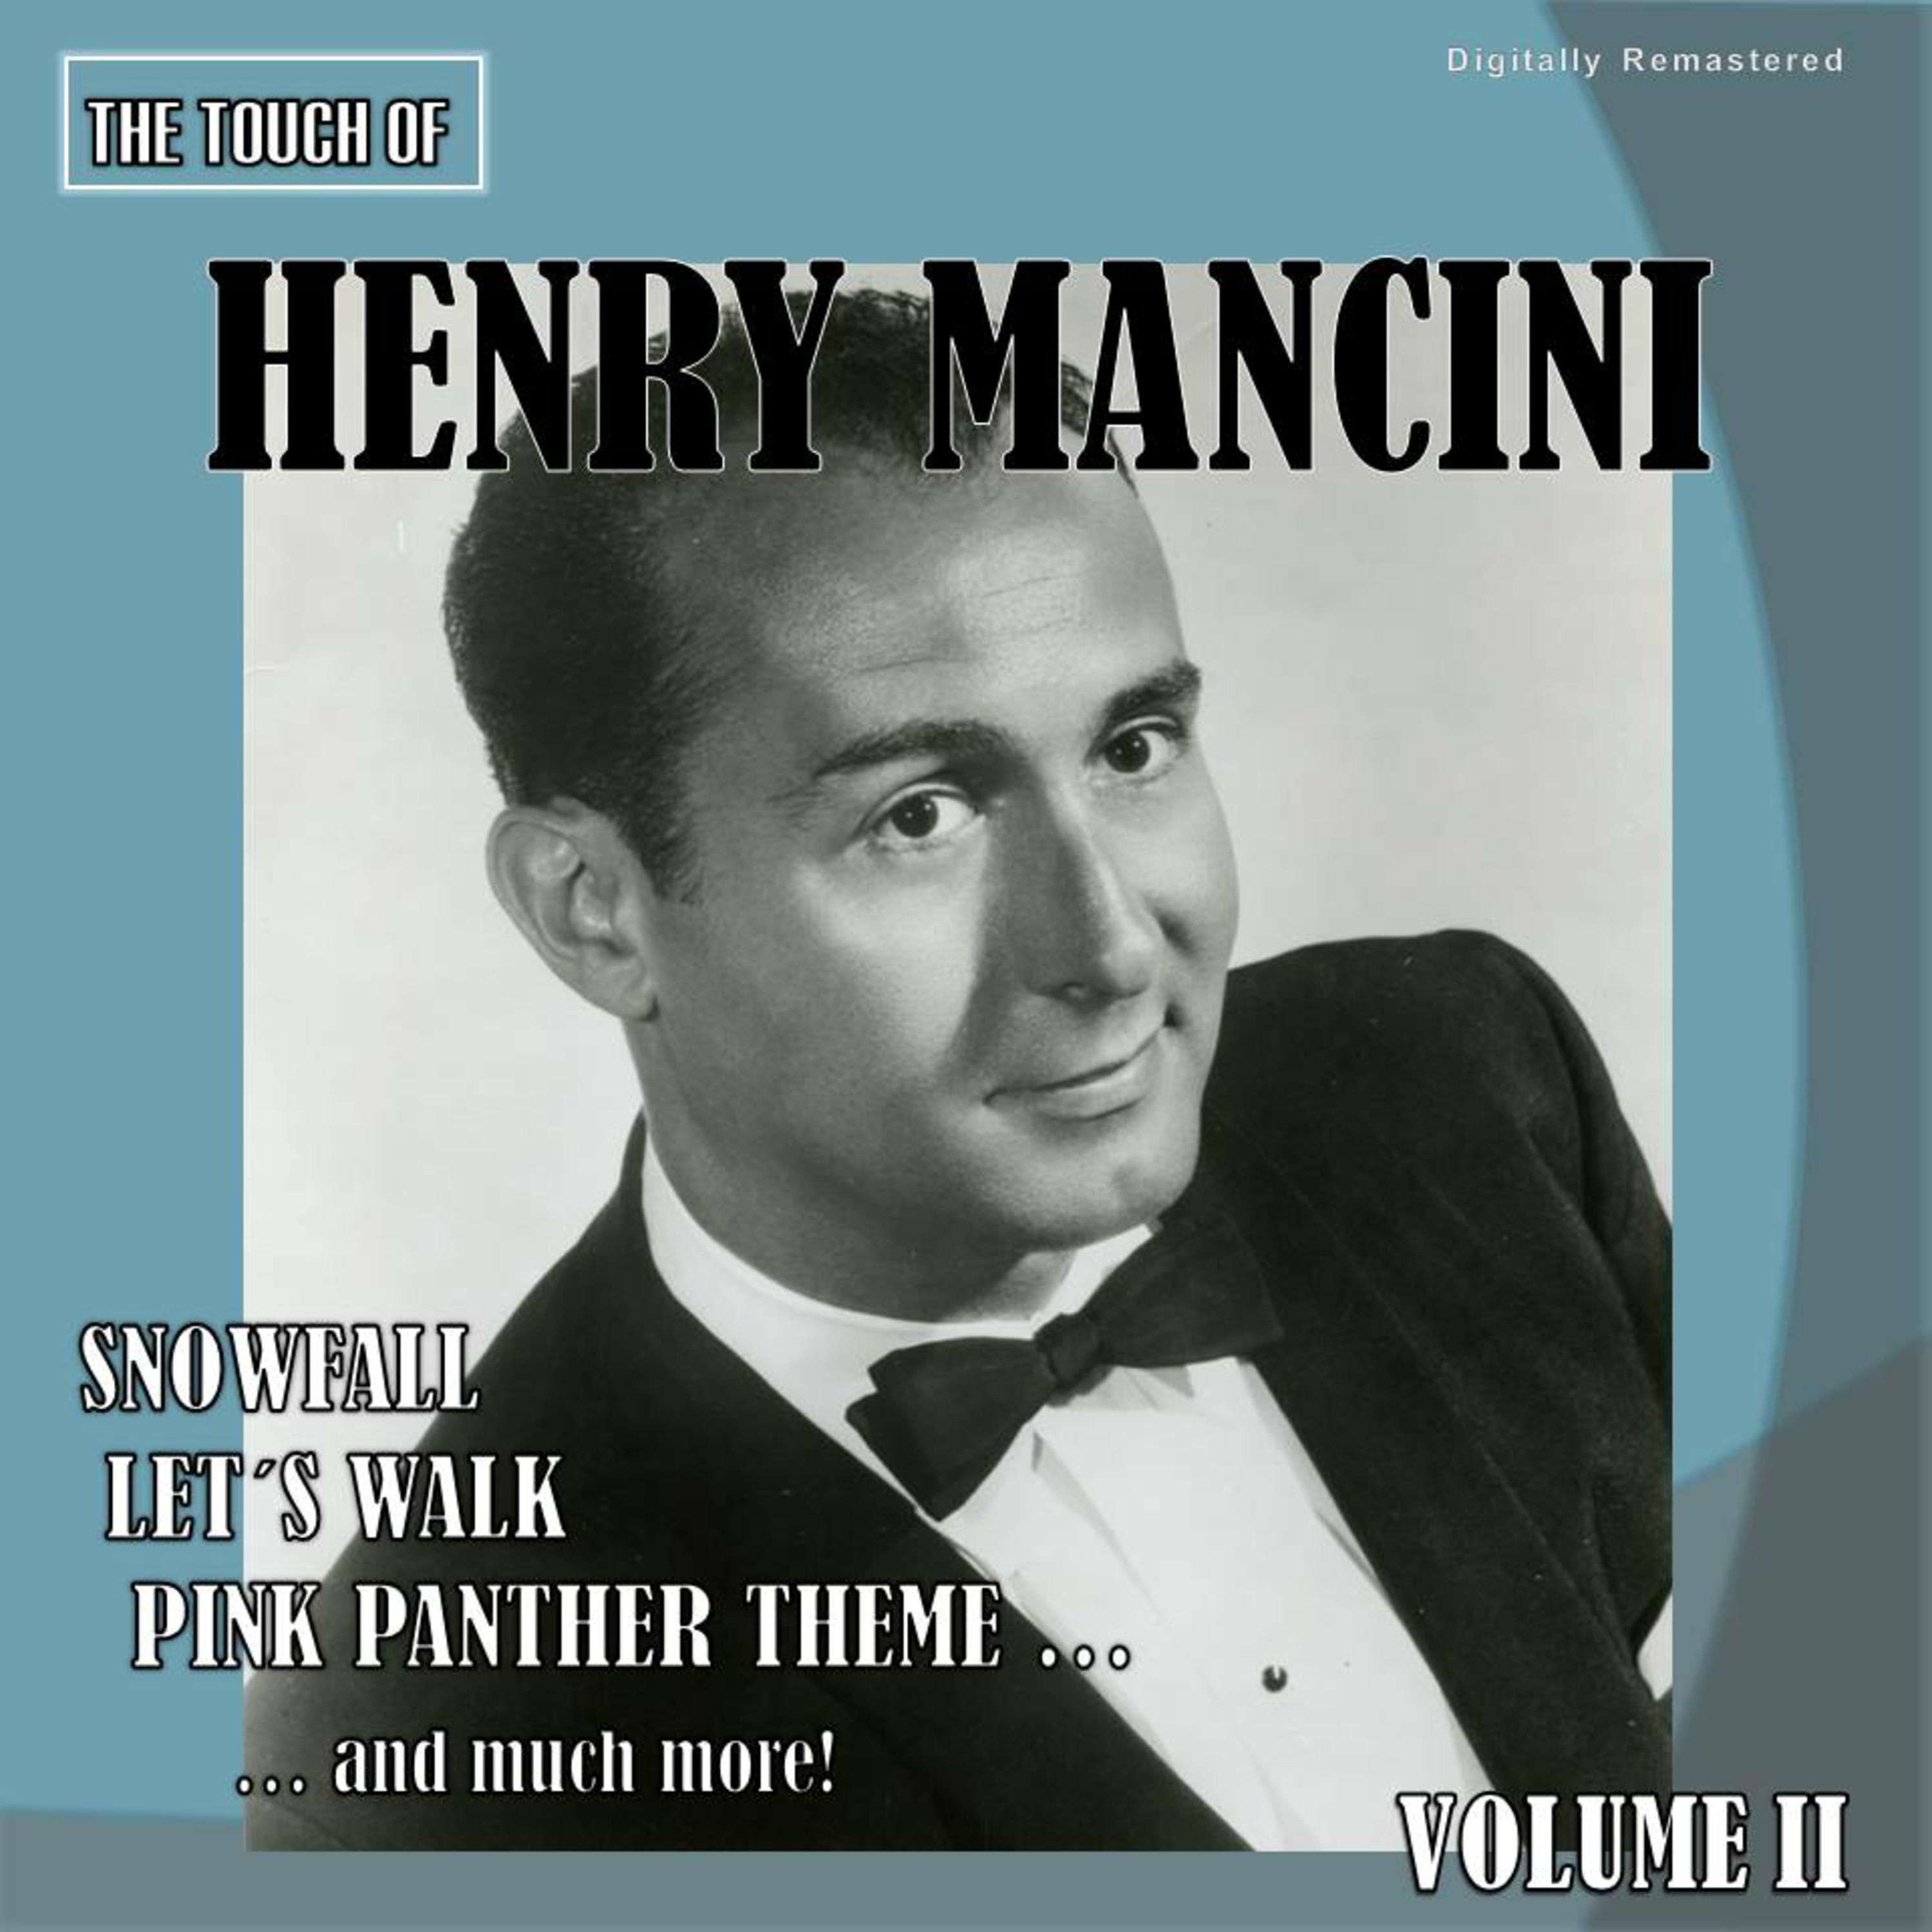 The Touch of Henry Mancini, Vol. 2 (Digitally Remastered)